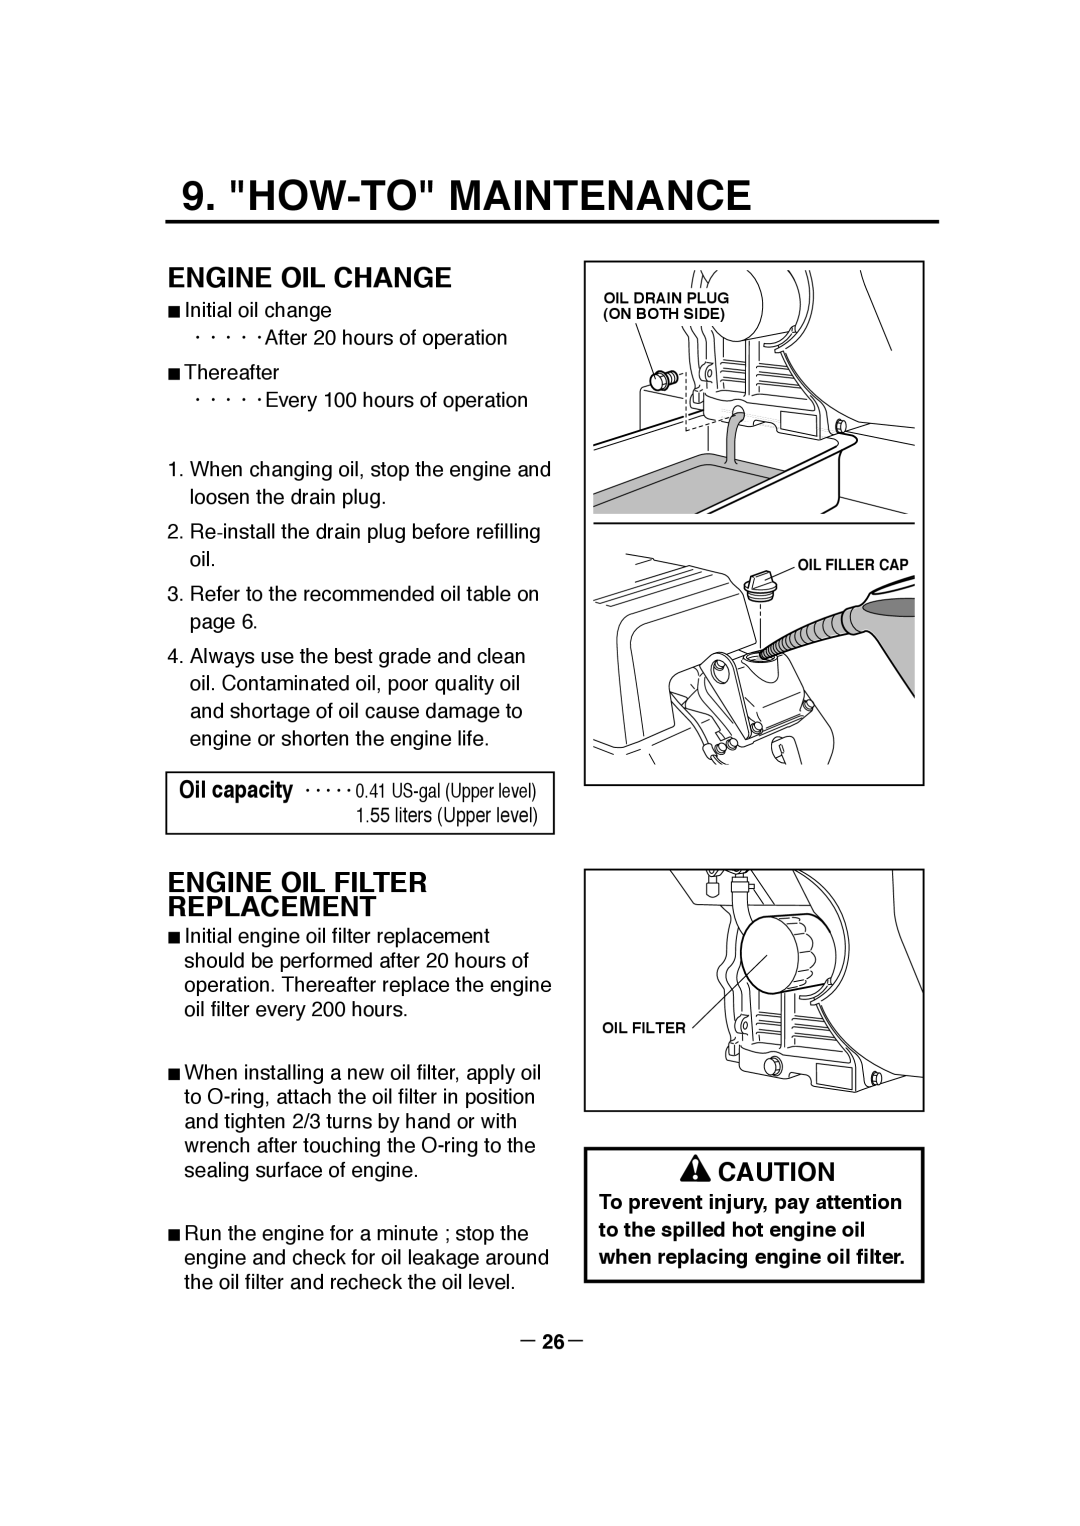 Makita G12010R manual How-Tomaintenance, Engine Oil Change, Engine Oil Filter Replacement 